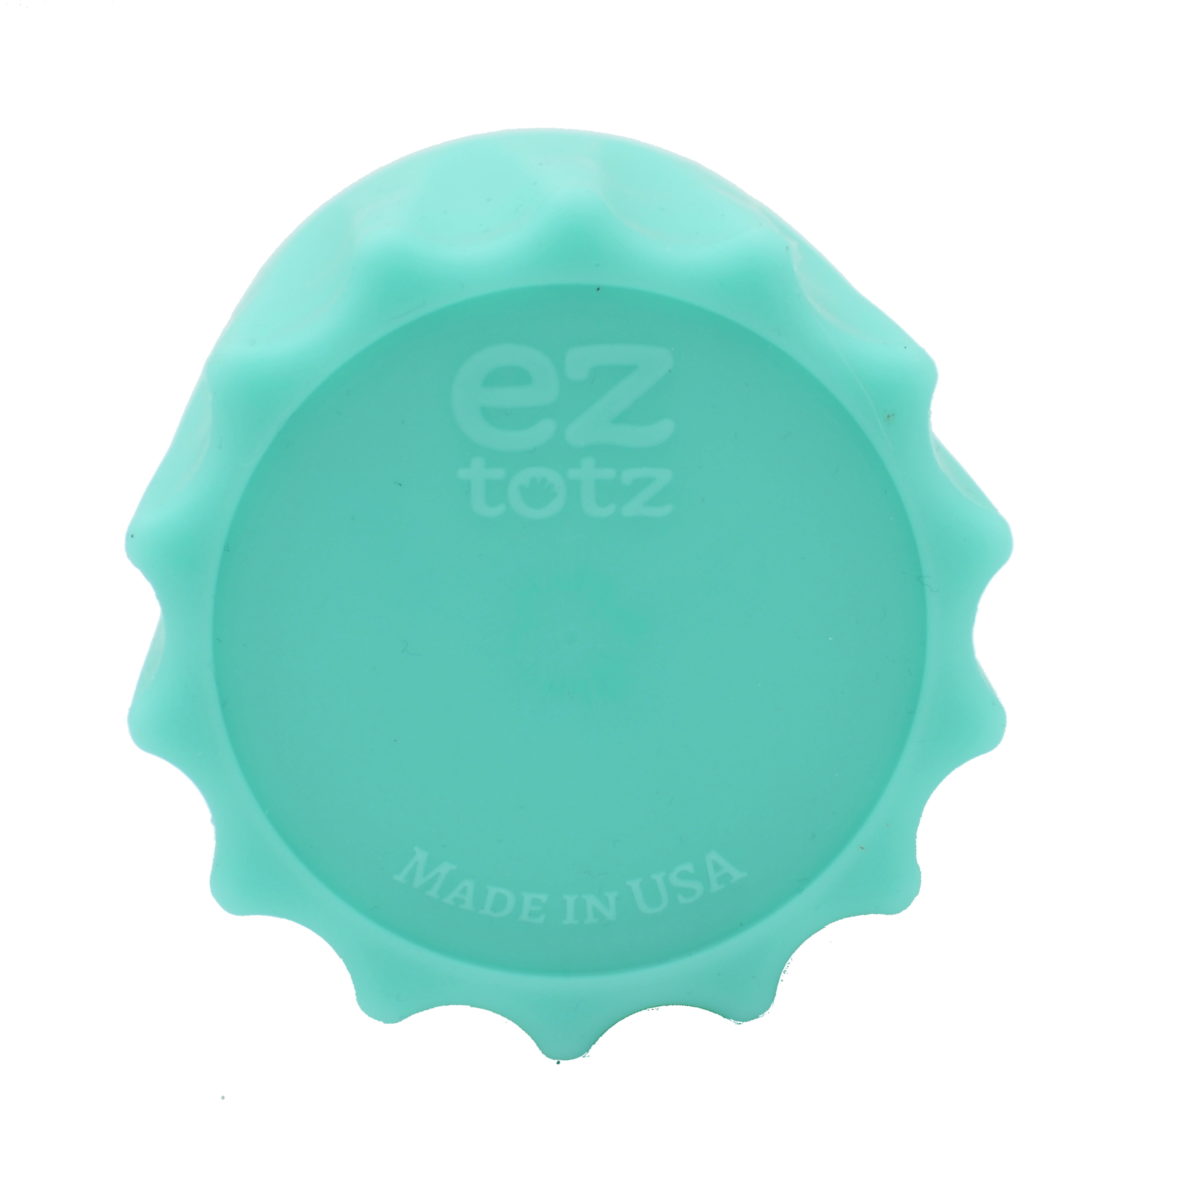 Silicone Tiny Cup - Teal